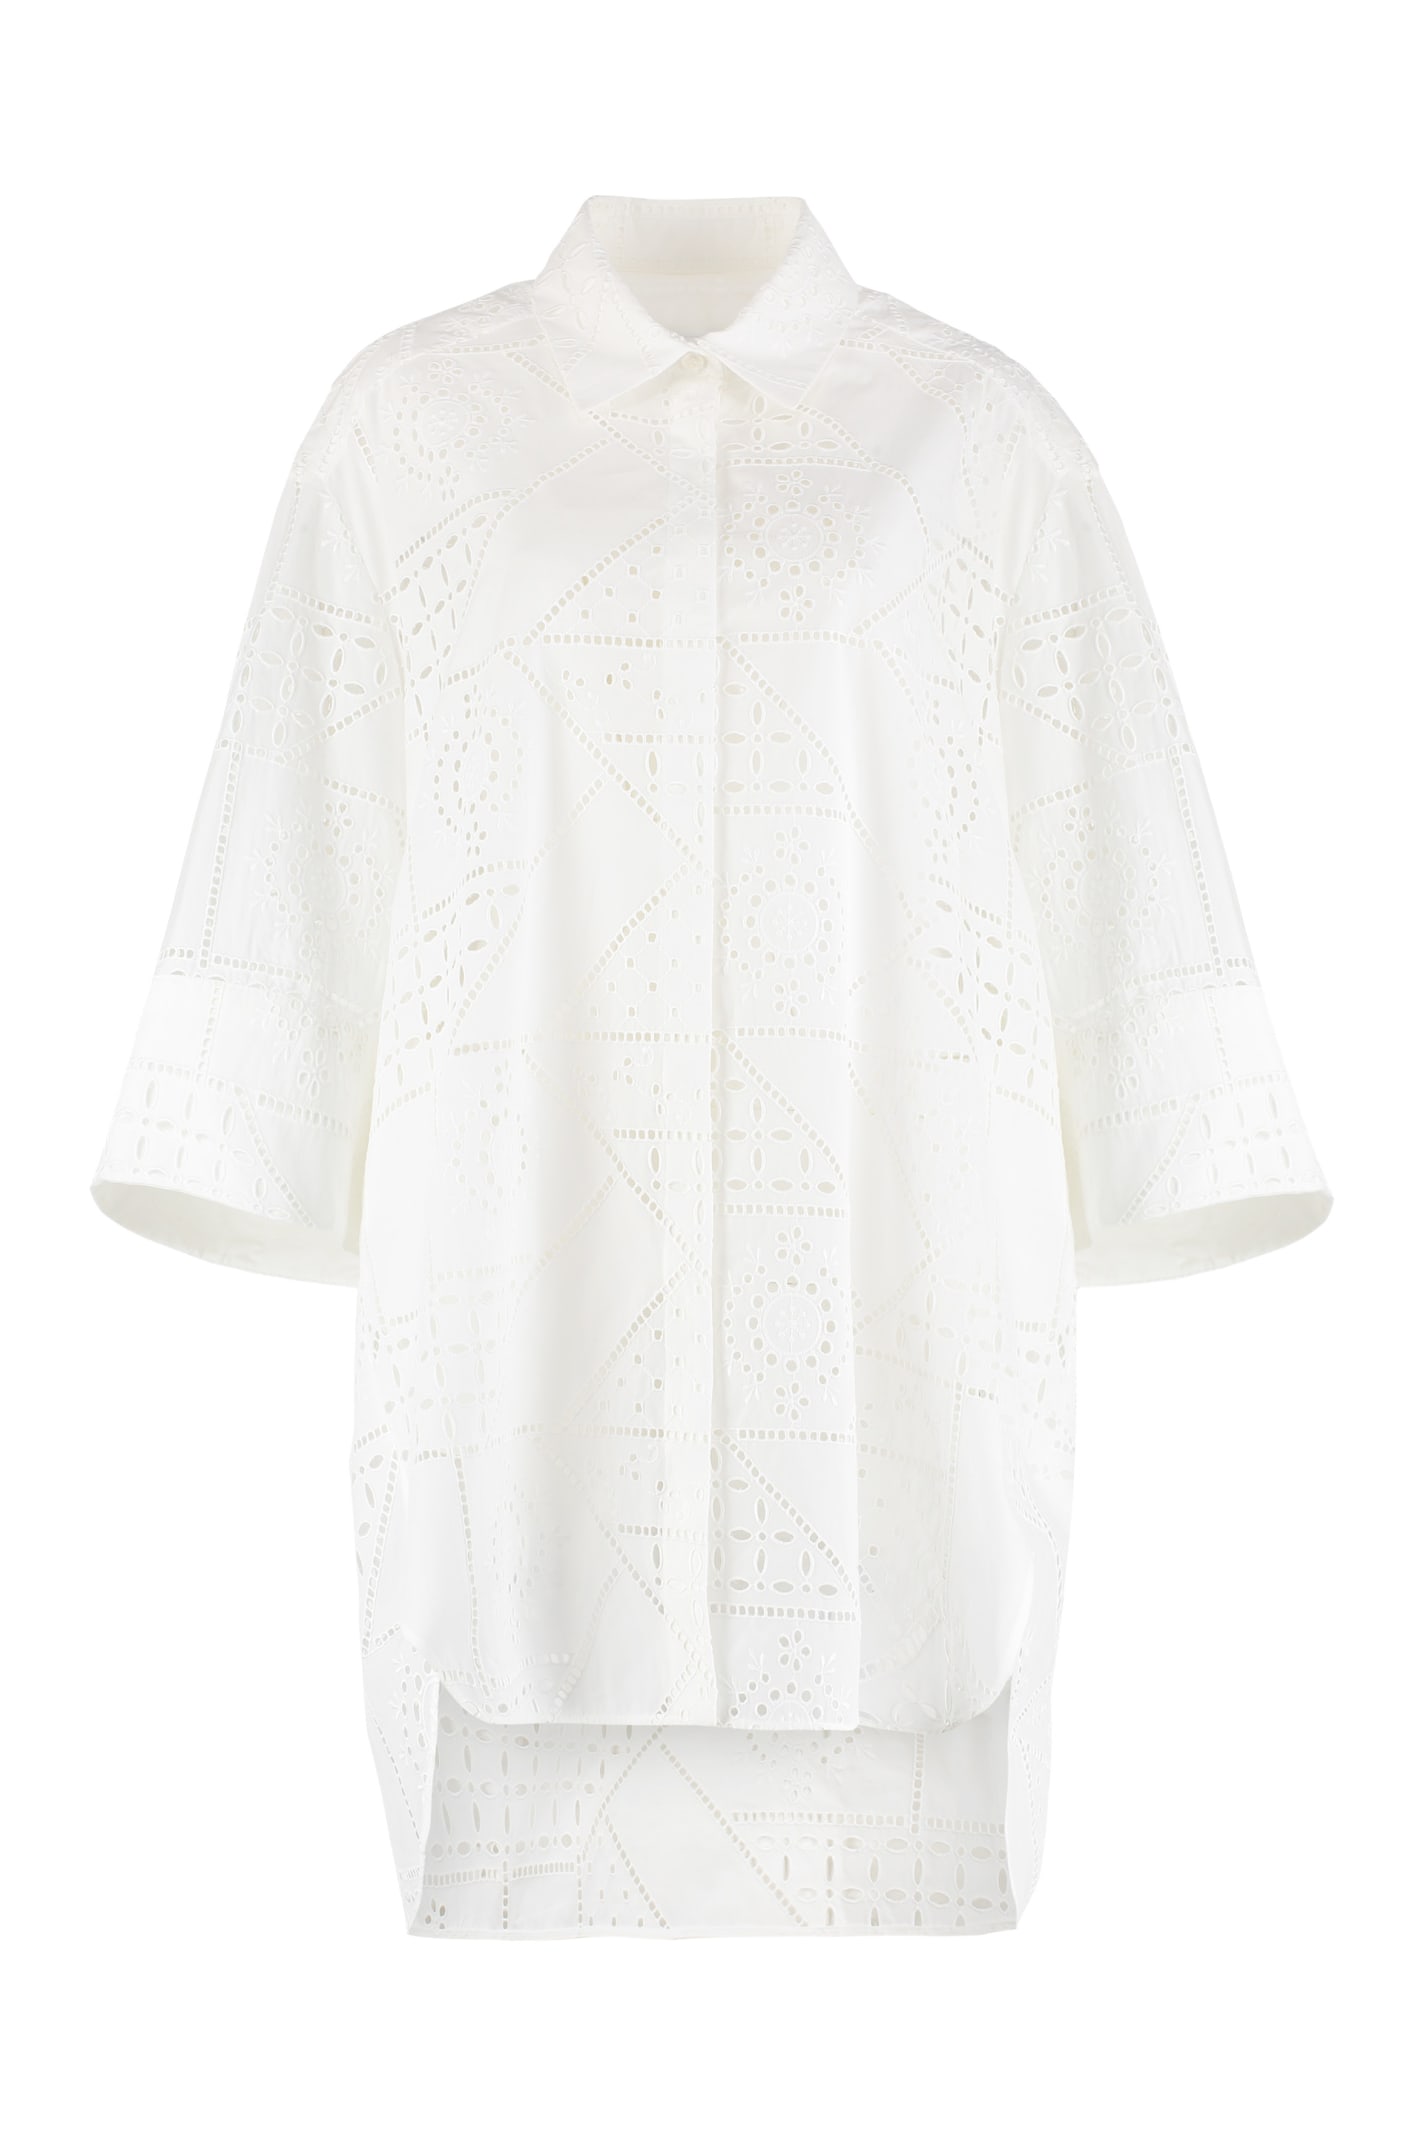 MSGM Broderie Anglaise Details Cotton Shirtdress